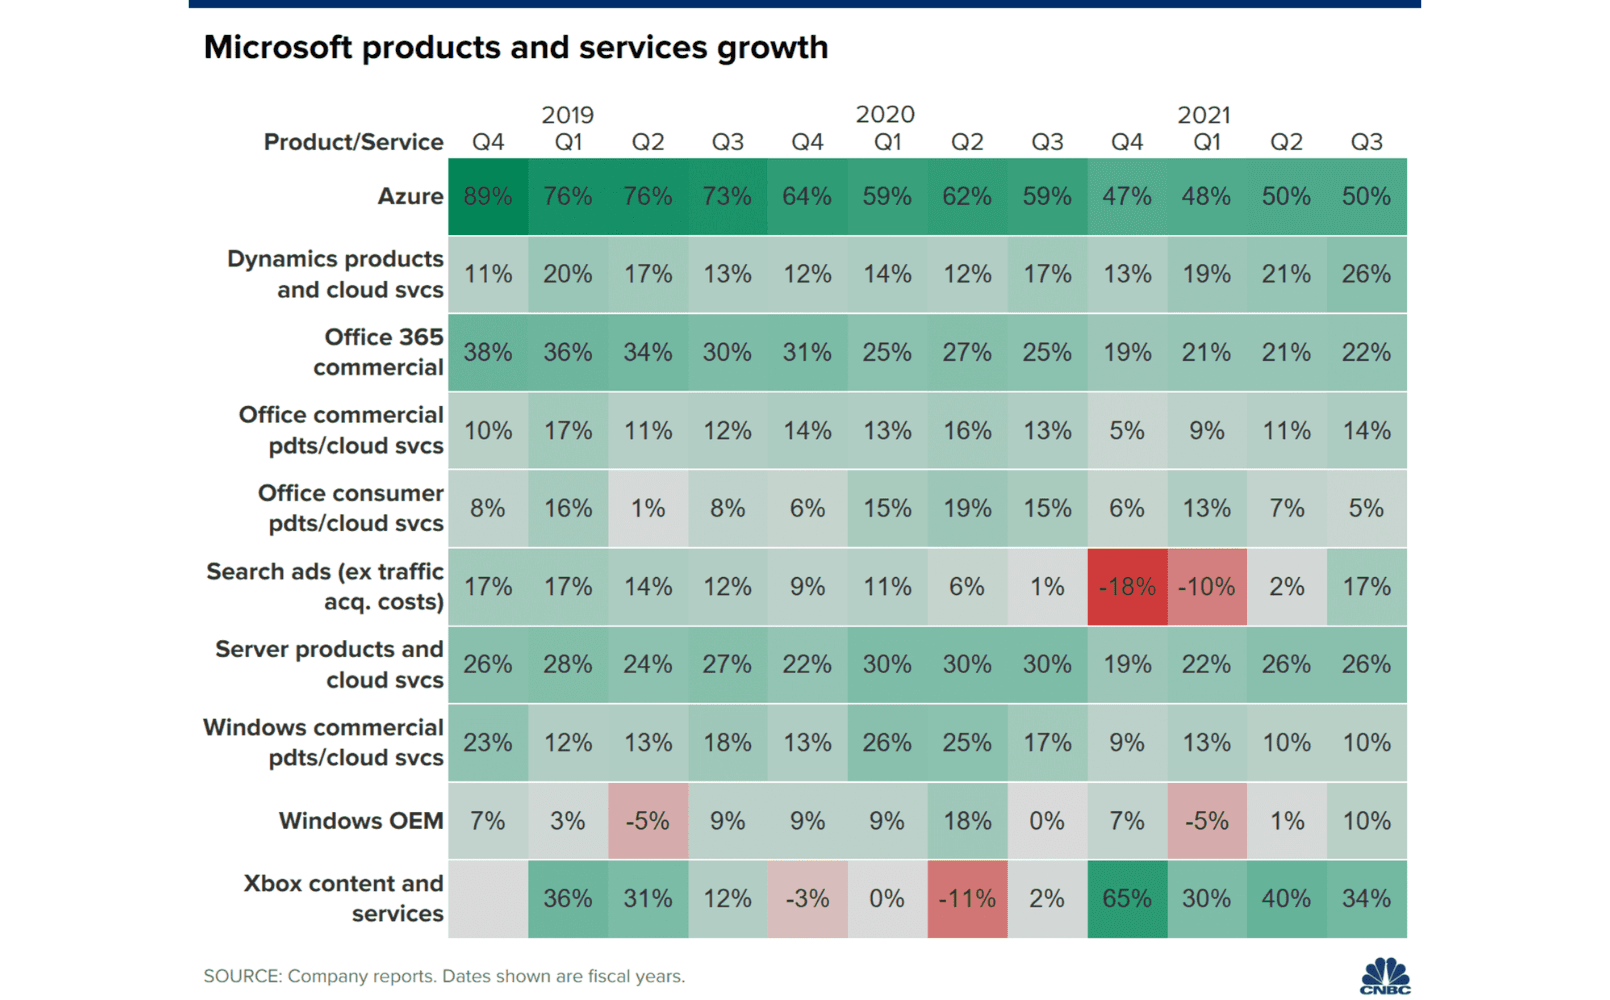 Microsoft product and services growth